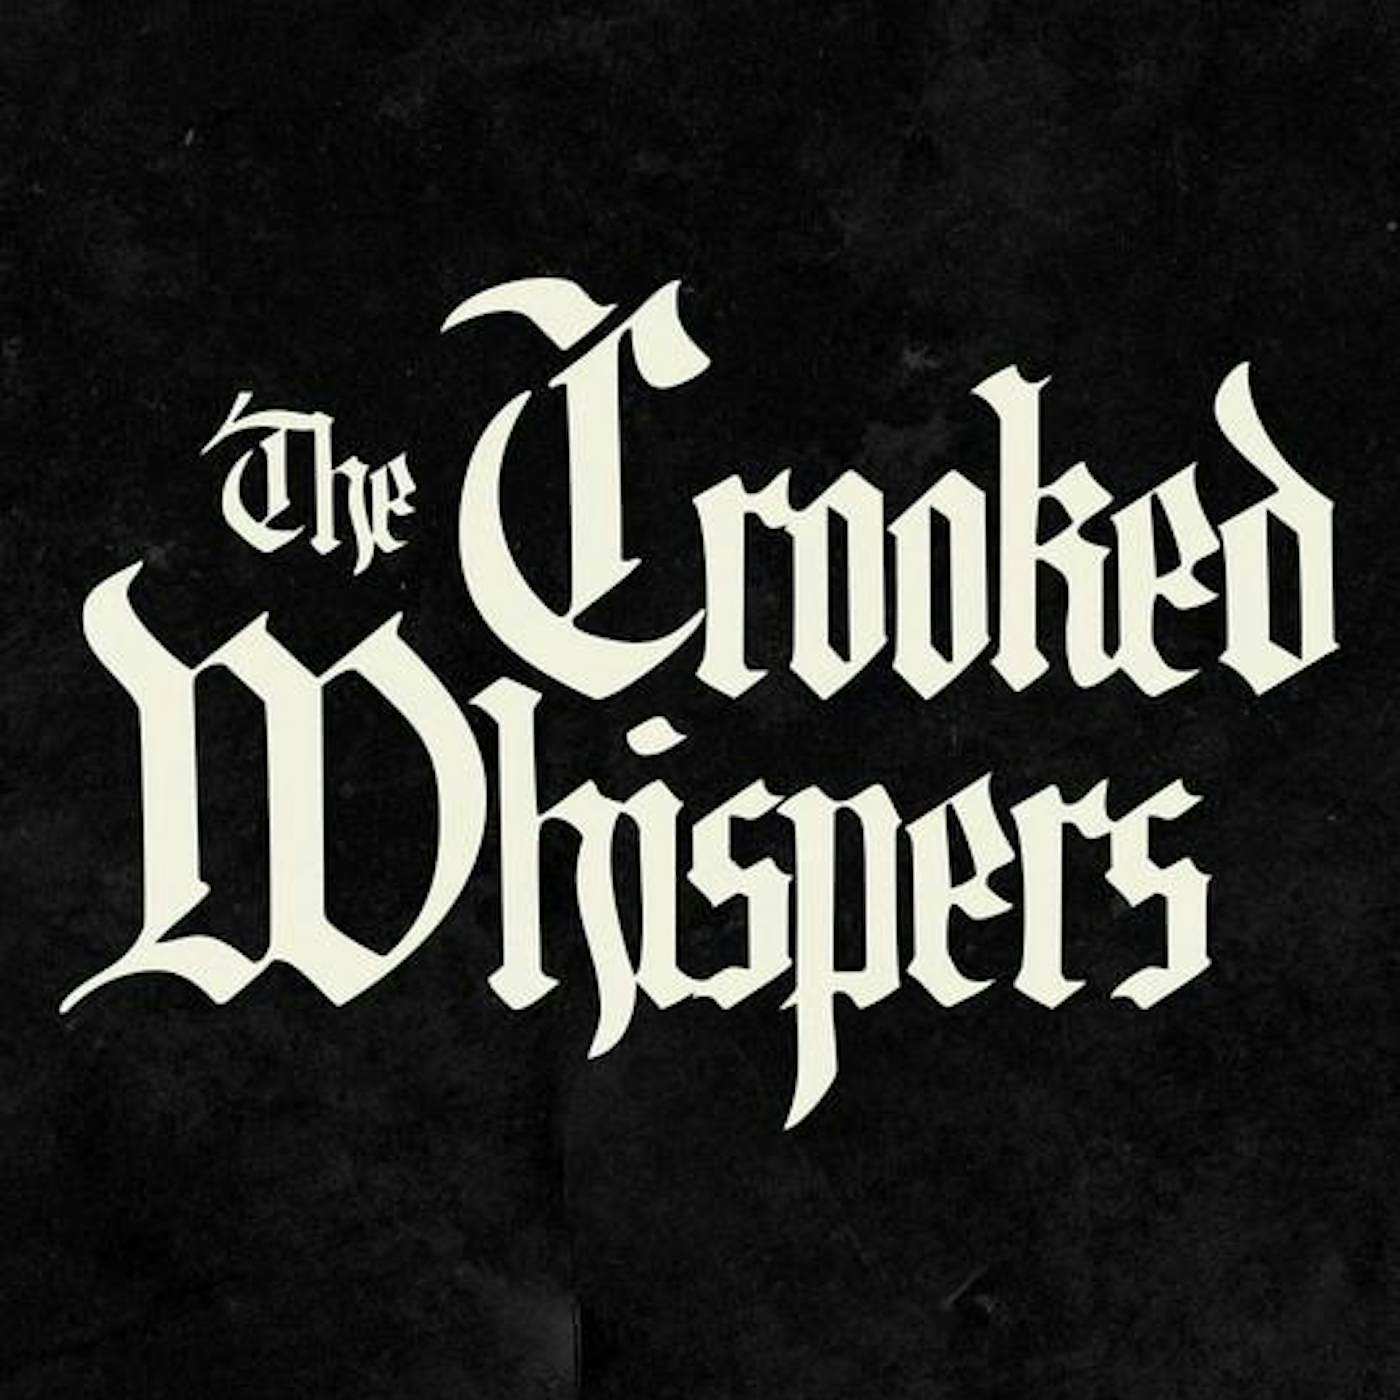 The Crooked Whispers